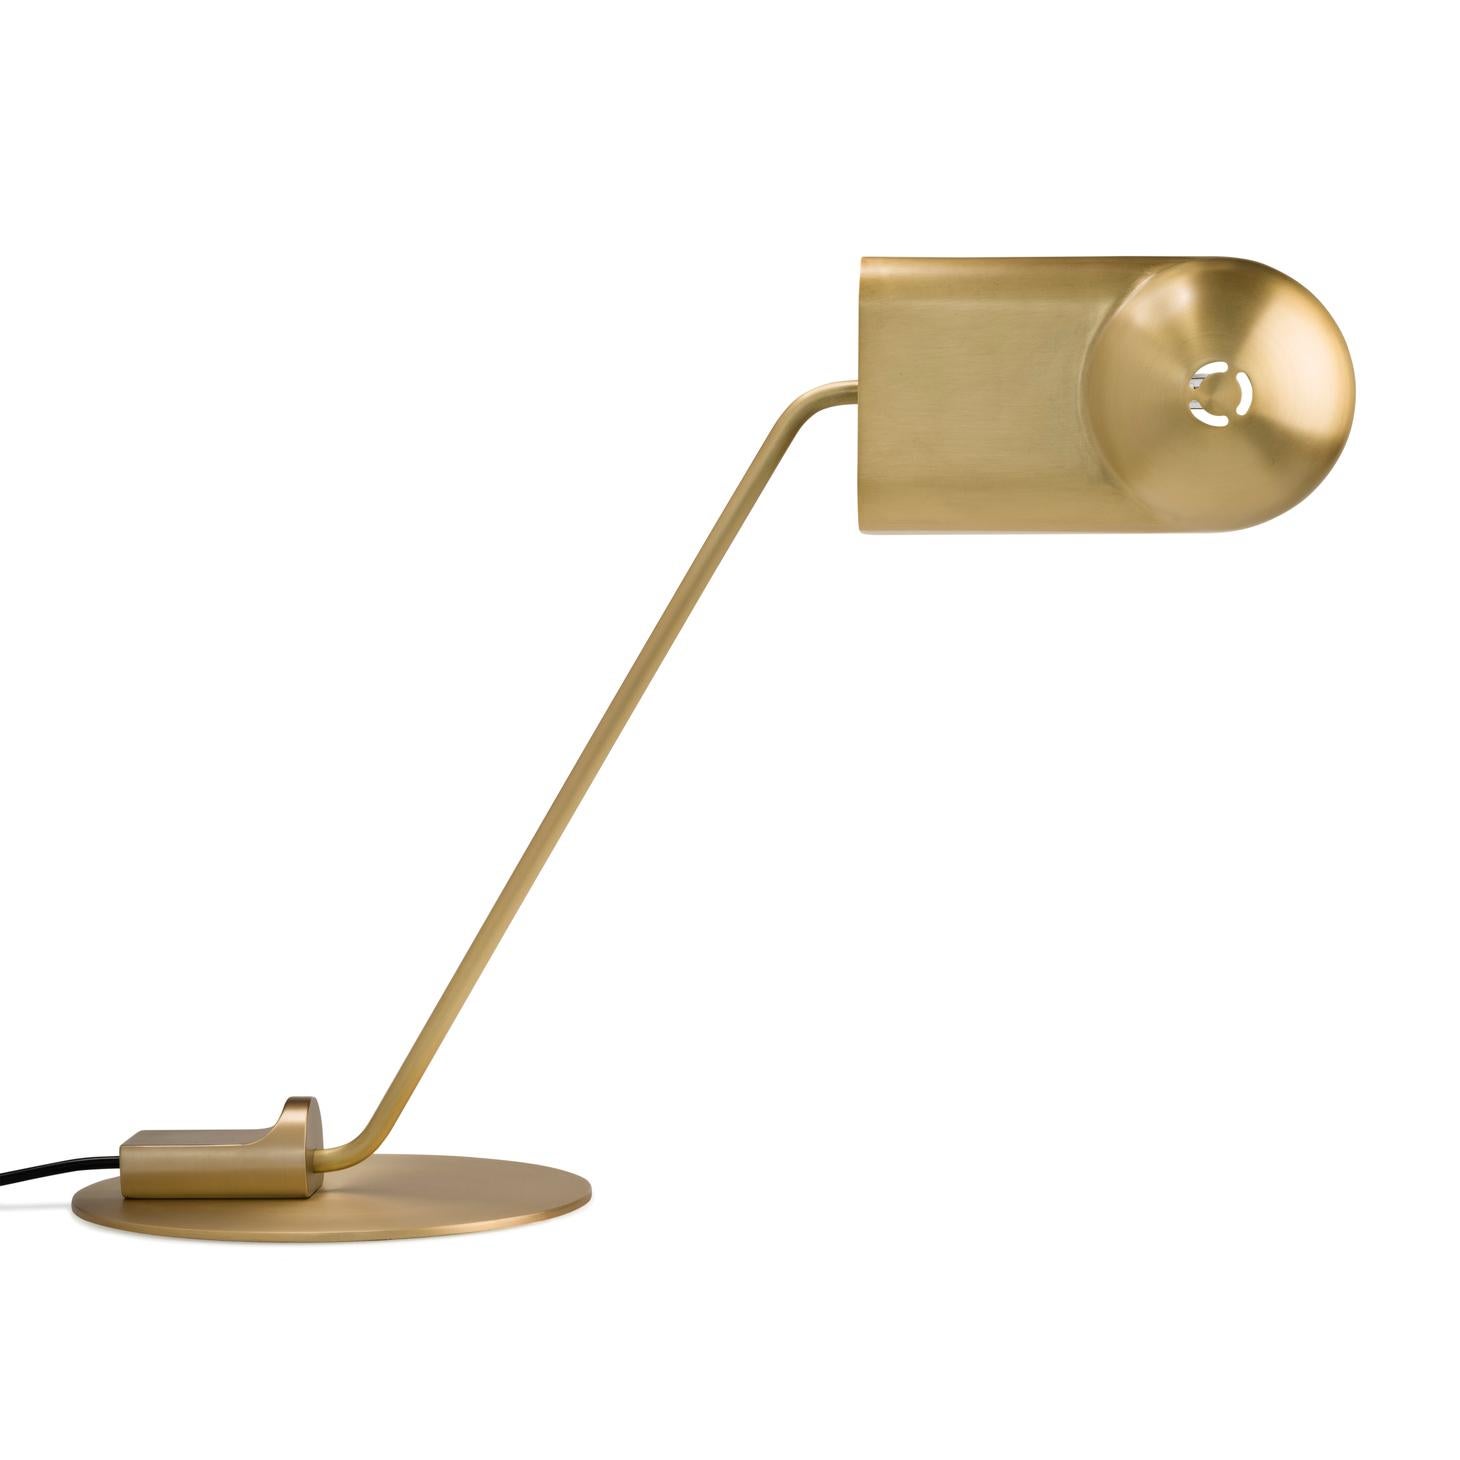 Contemporary Set of Two Joe Colombo 'Domo' Brass Table Lamps by Karakter